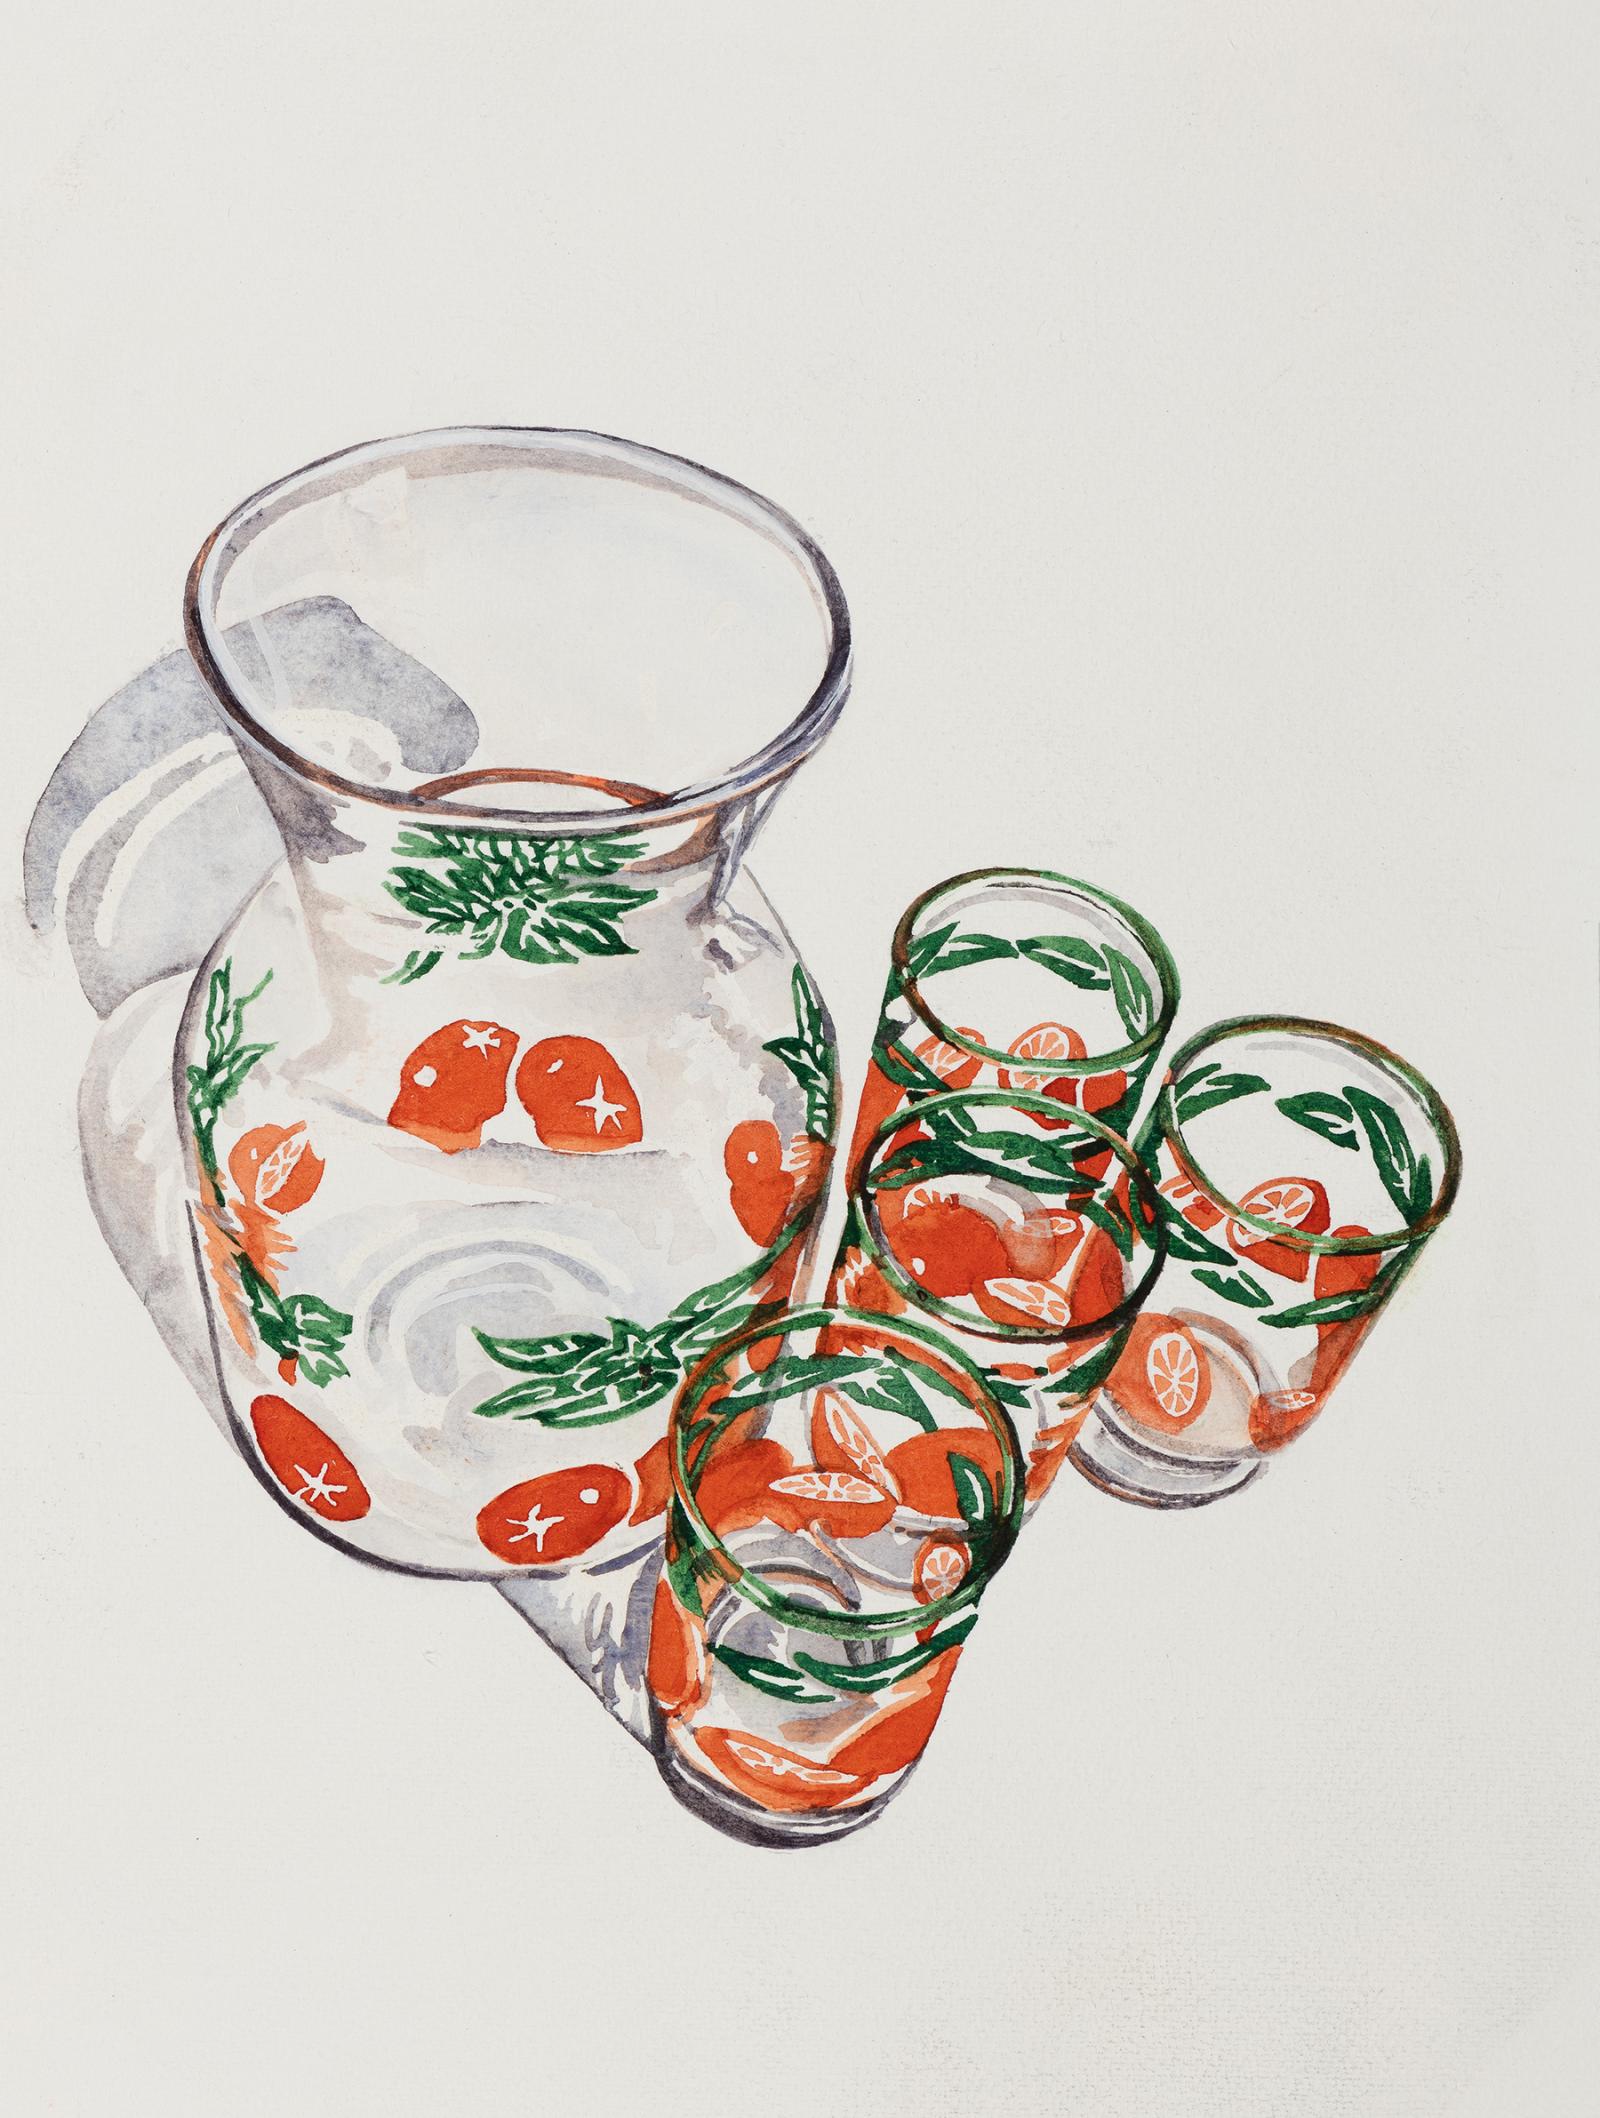 A staple of American households from the 1940s onward, the orange juice glasses depicted in this watercolor series were sold in so-called “Hostess sets” that typically included a carafe or pitcher and six to eight glasses. Priced cheaply for everyday use, they sold in the millions with the two major midcentury manufacturers, Libbey based in Massachusetts, and Anchor Hocking based in Ohio, duking it out for market share. Atypical for the time and still in production today, Libbey’s whimsical designs were the byproduct of the Jewish female design team of Freda Diamond and Virginia Hamill. Diamond, who stayed at the company until the mid-1980s was recorded in a 1954 Life magazine as having “probably done more to get simple, well-styled furnishings into every room of the average U.S. home than any other designer.”

Today, the majority of these sets are incomplete and sold in antiques malls and thrift shops. The photographs these paintings are based on were found on Ebay and other resale websites, where lots of midcentury enthusiasts buy whatever remains they can find of this period of design.